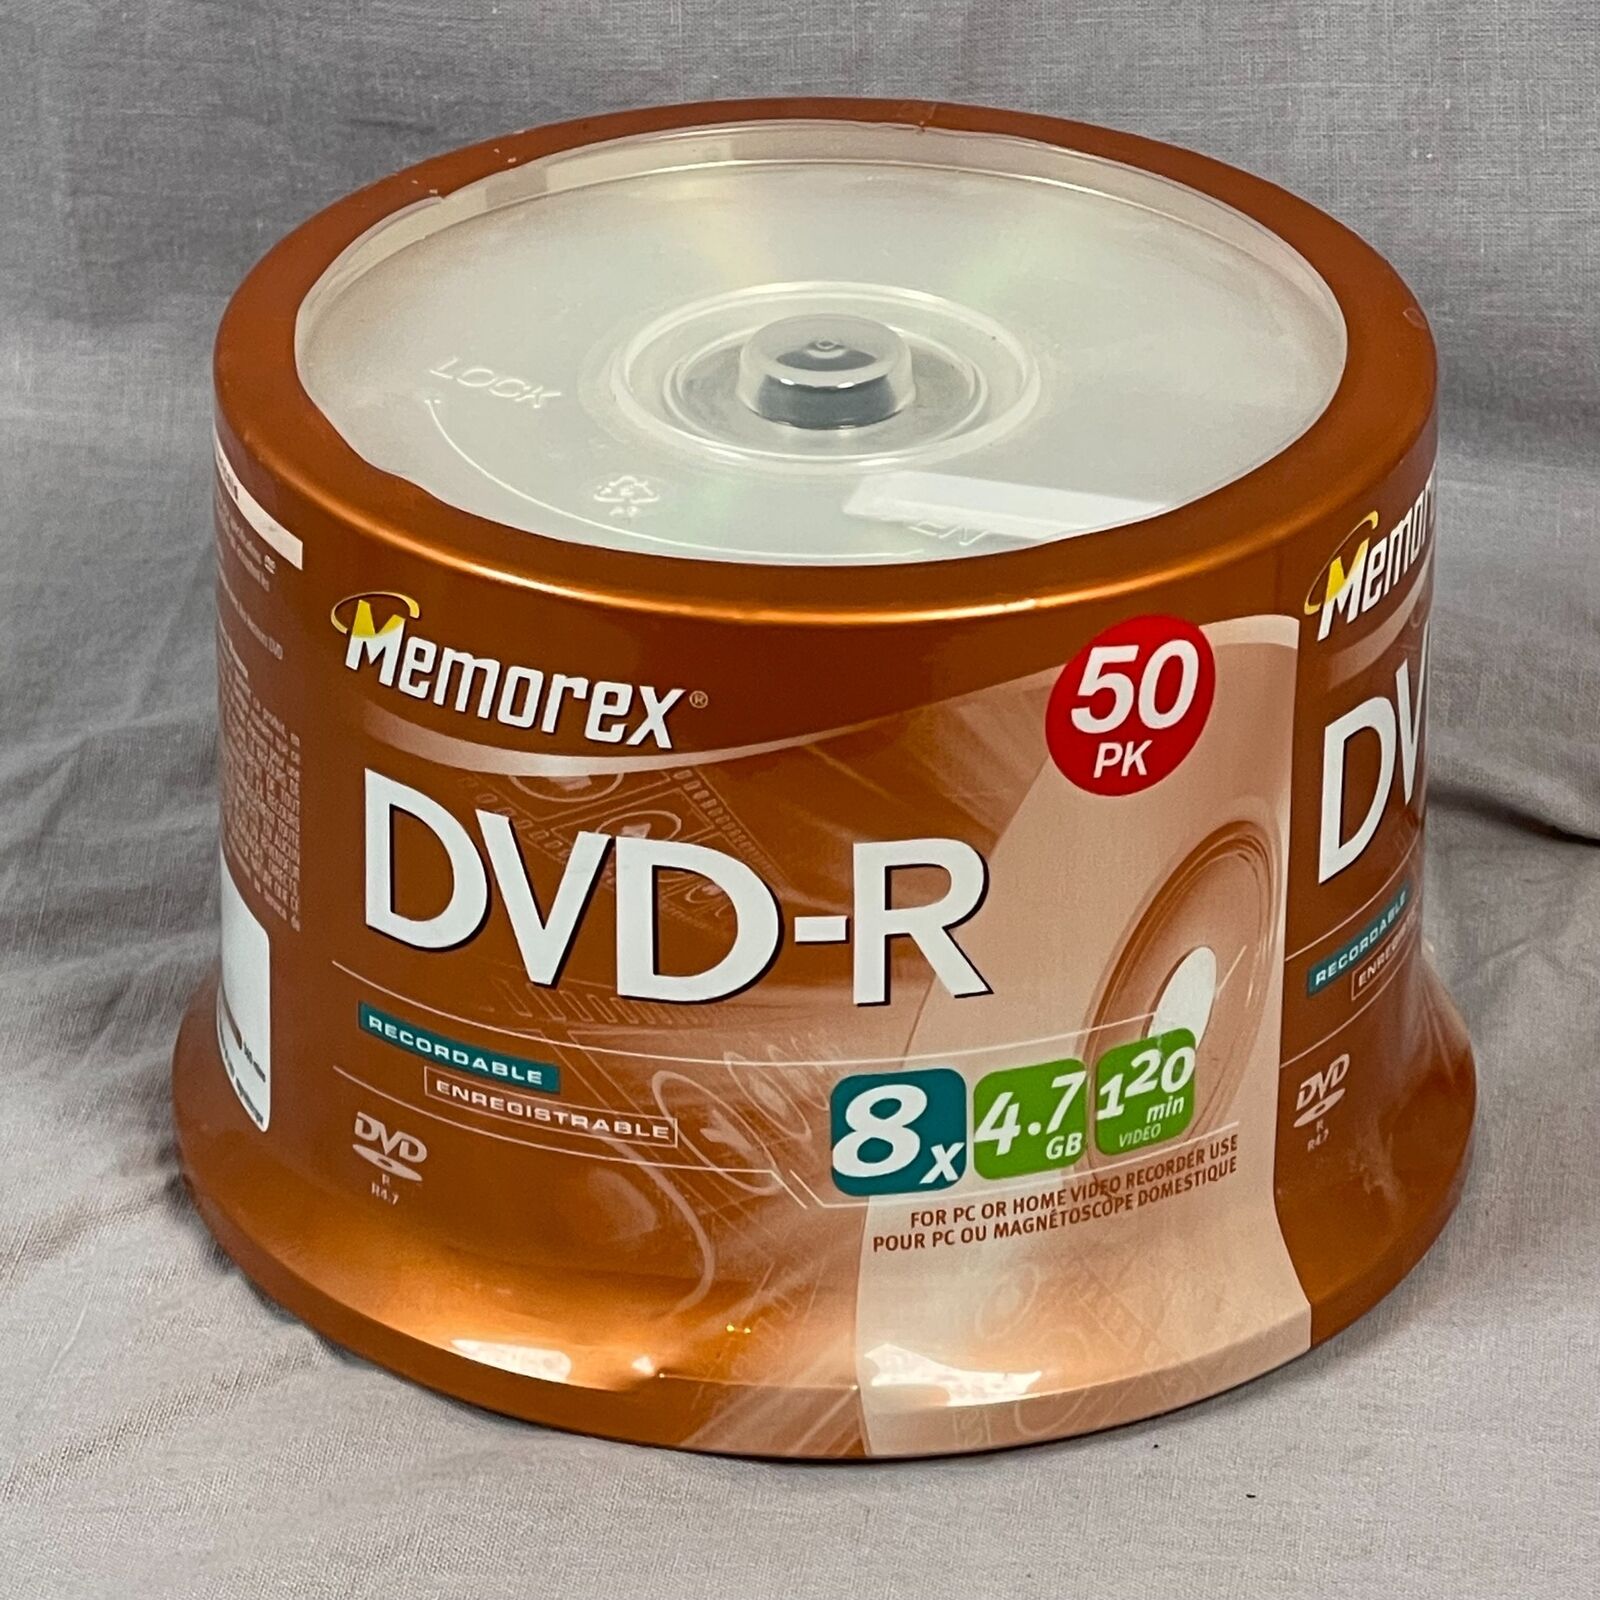 Memorex 50pk DVD-R 8x Speed Recordable 4.7 GB PC Home Video 120 Minutes Sealed